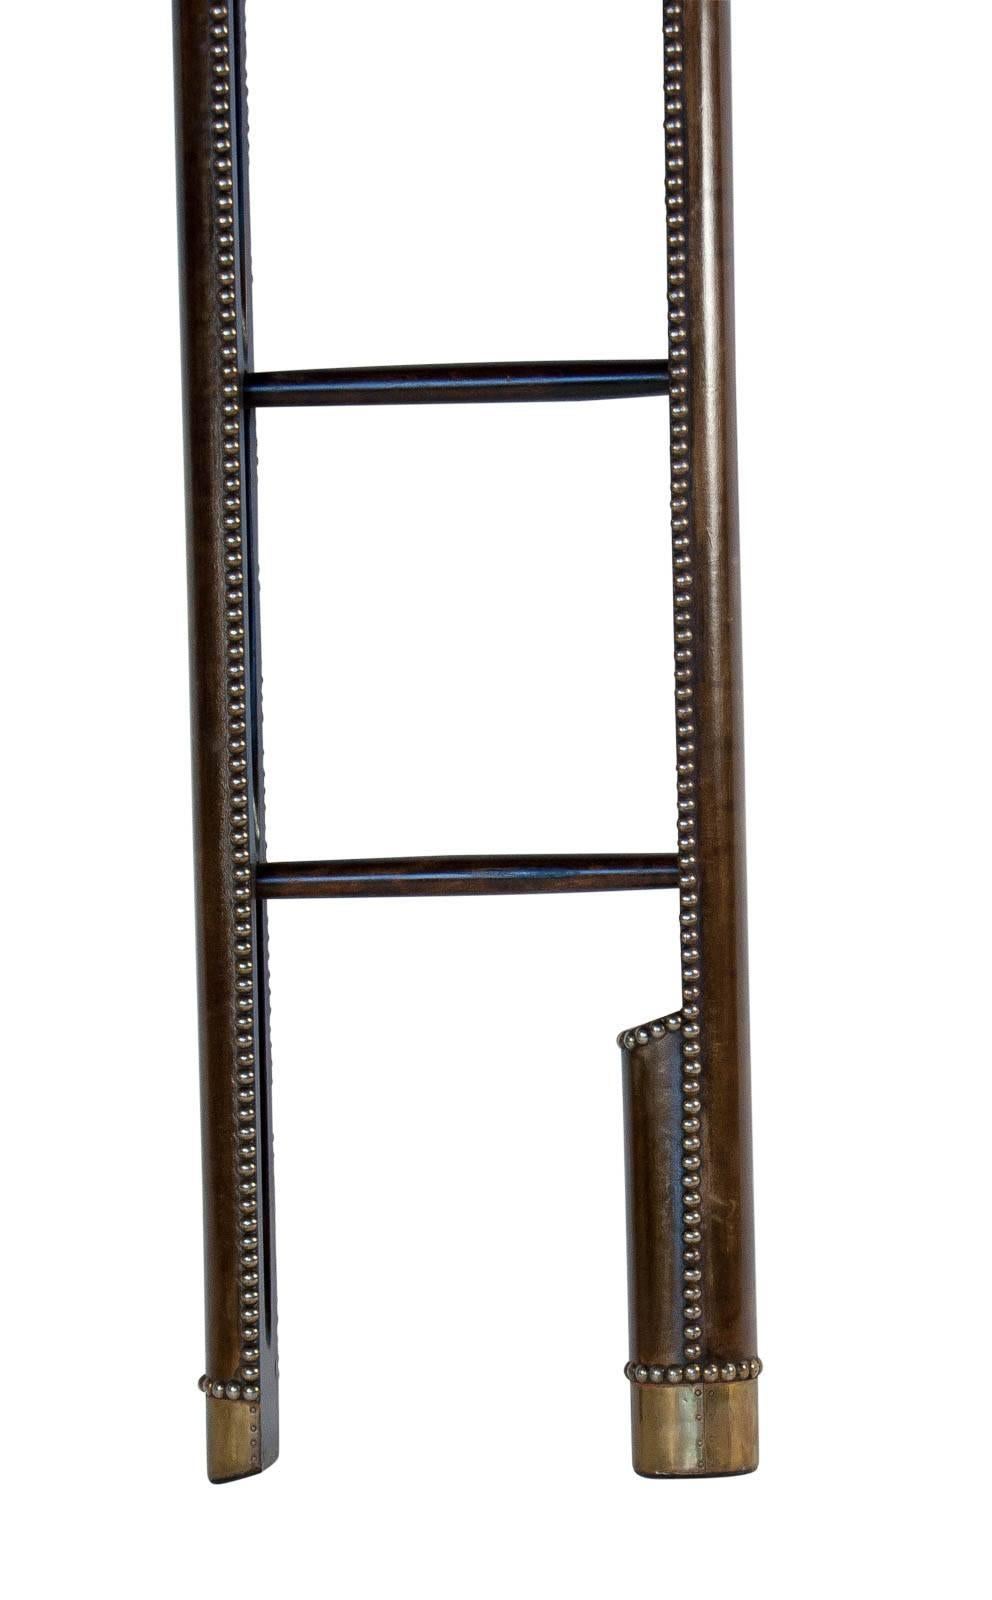 A handsome and scarce folding ladder perfect for getting on and off elephants or climbing (at your own peril) around your library. These where found in the stately homes of England and originated in India during the Anglo Indian Period. They are